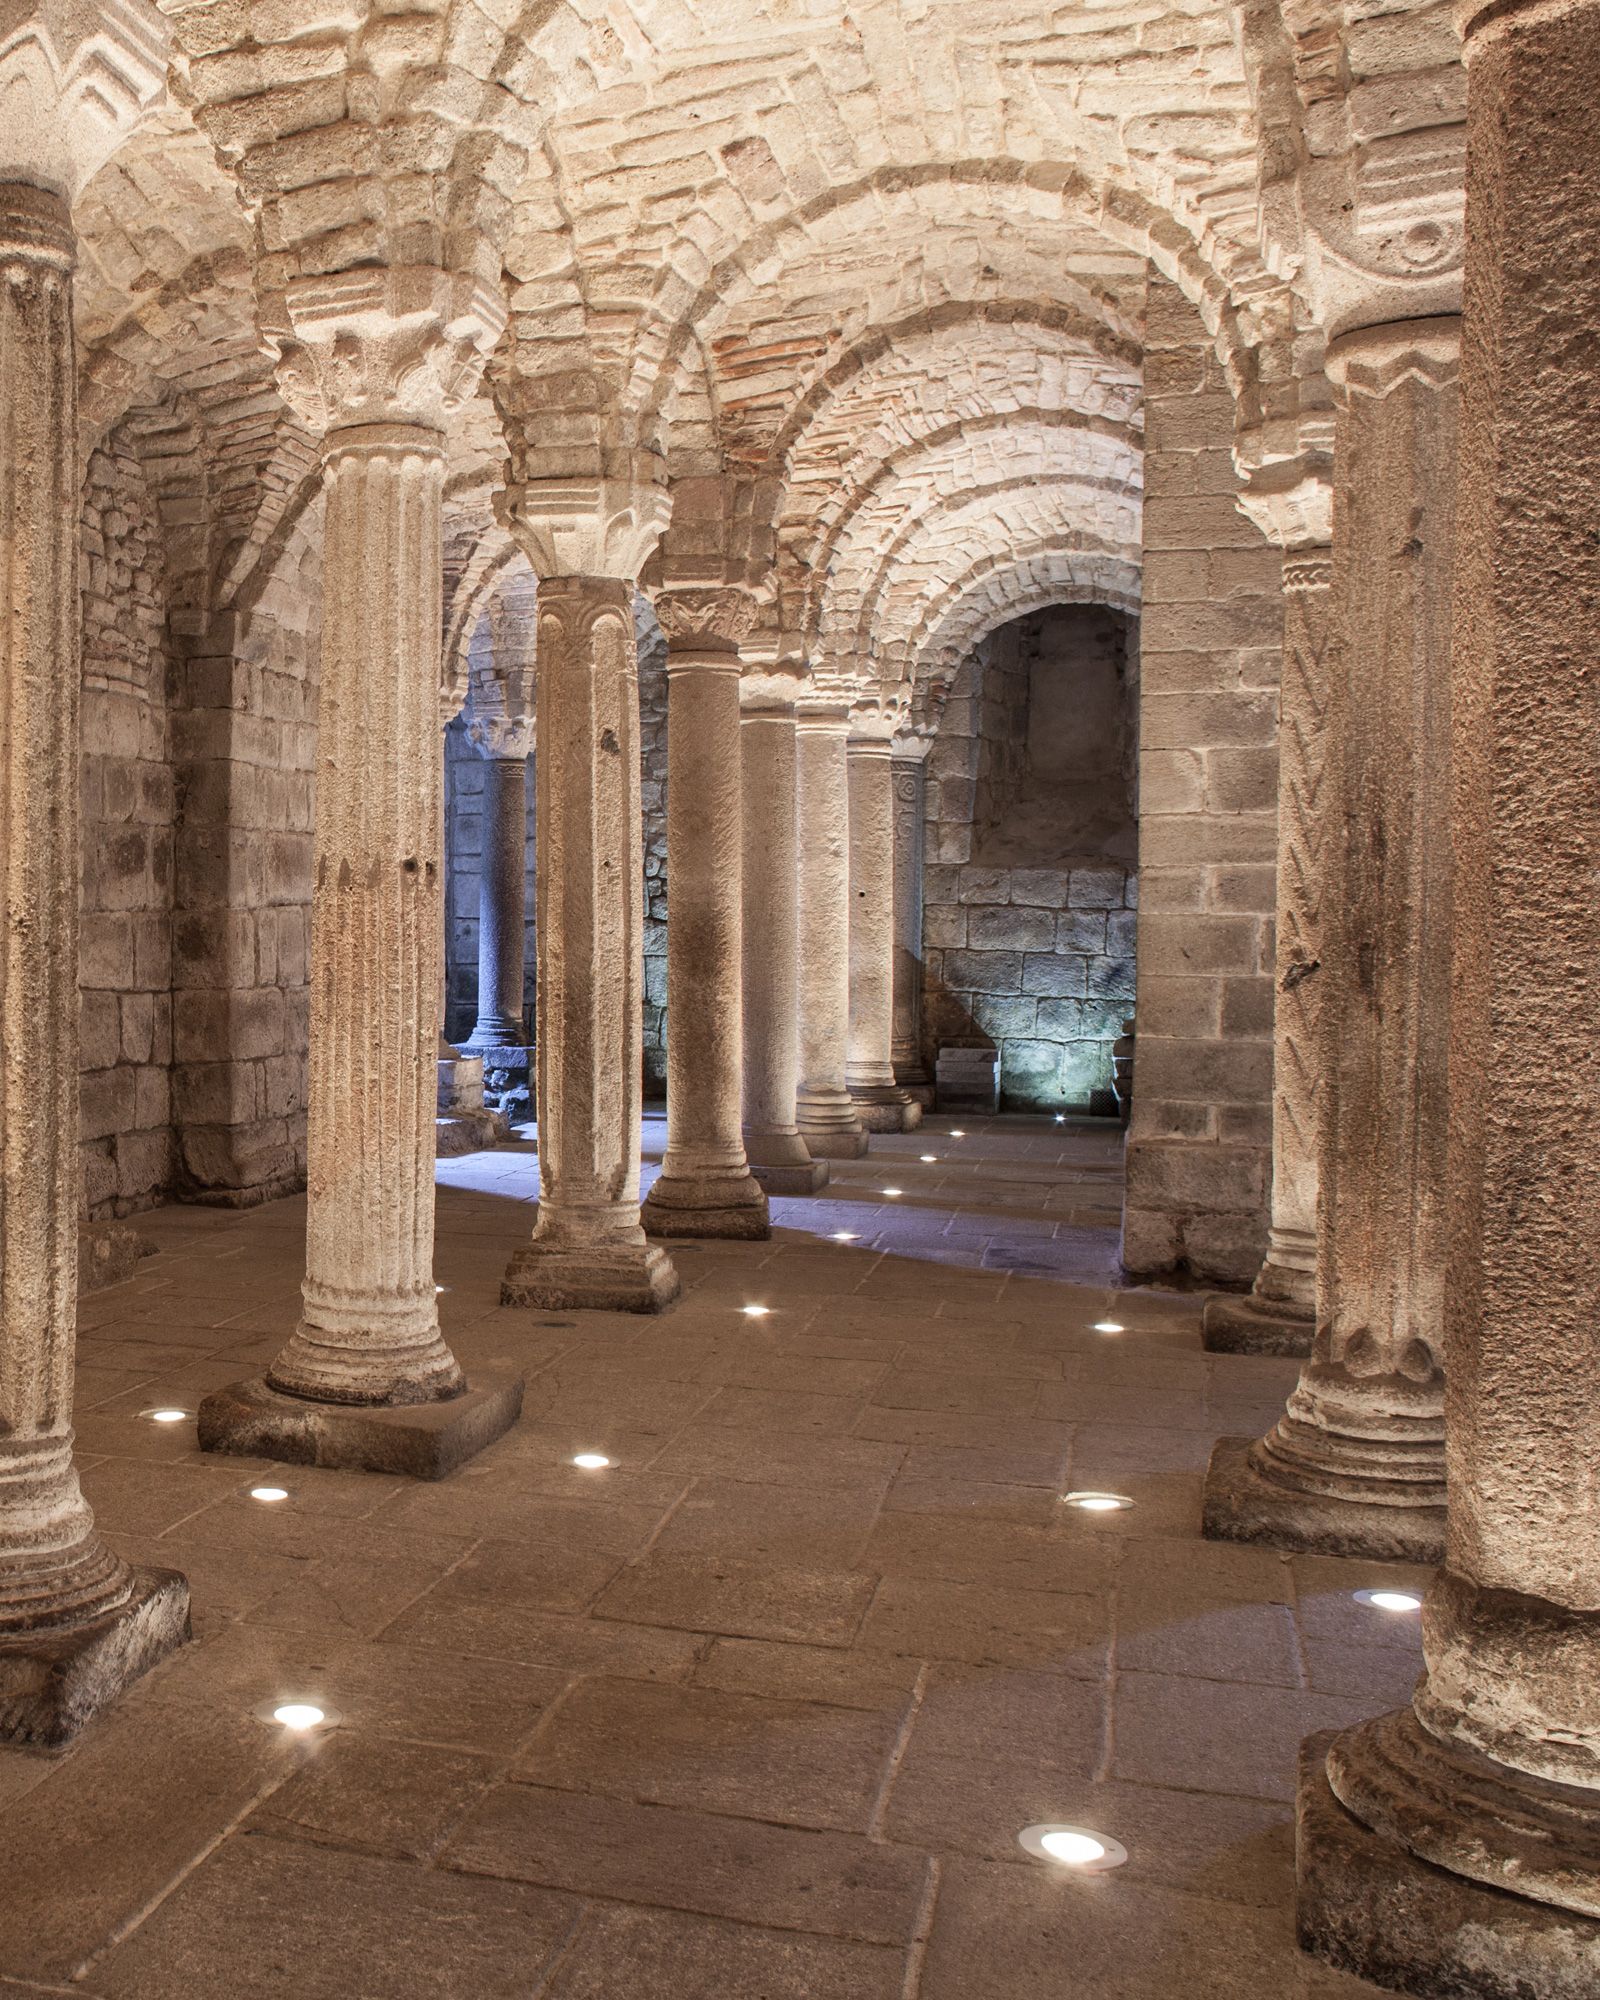 The crypt of the abbey